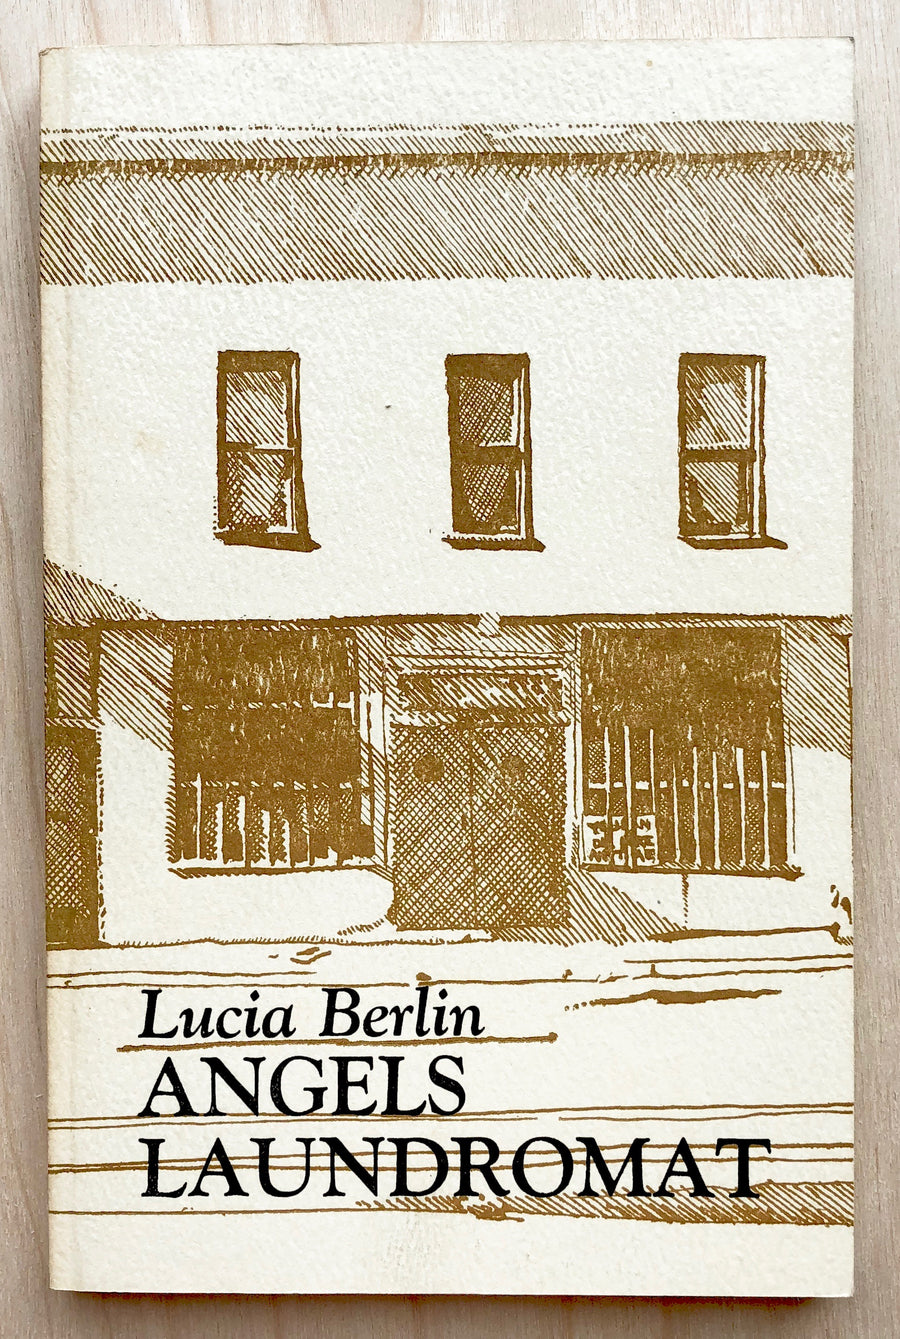 ANGELS  LAUNDROMAT by Lucia Berlin